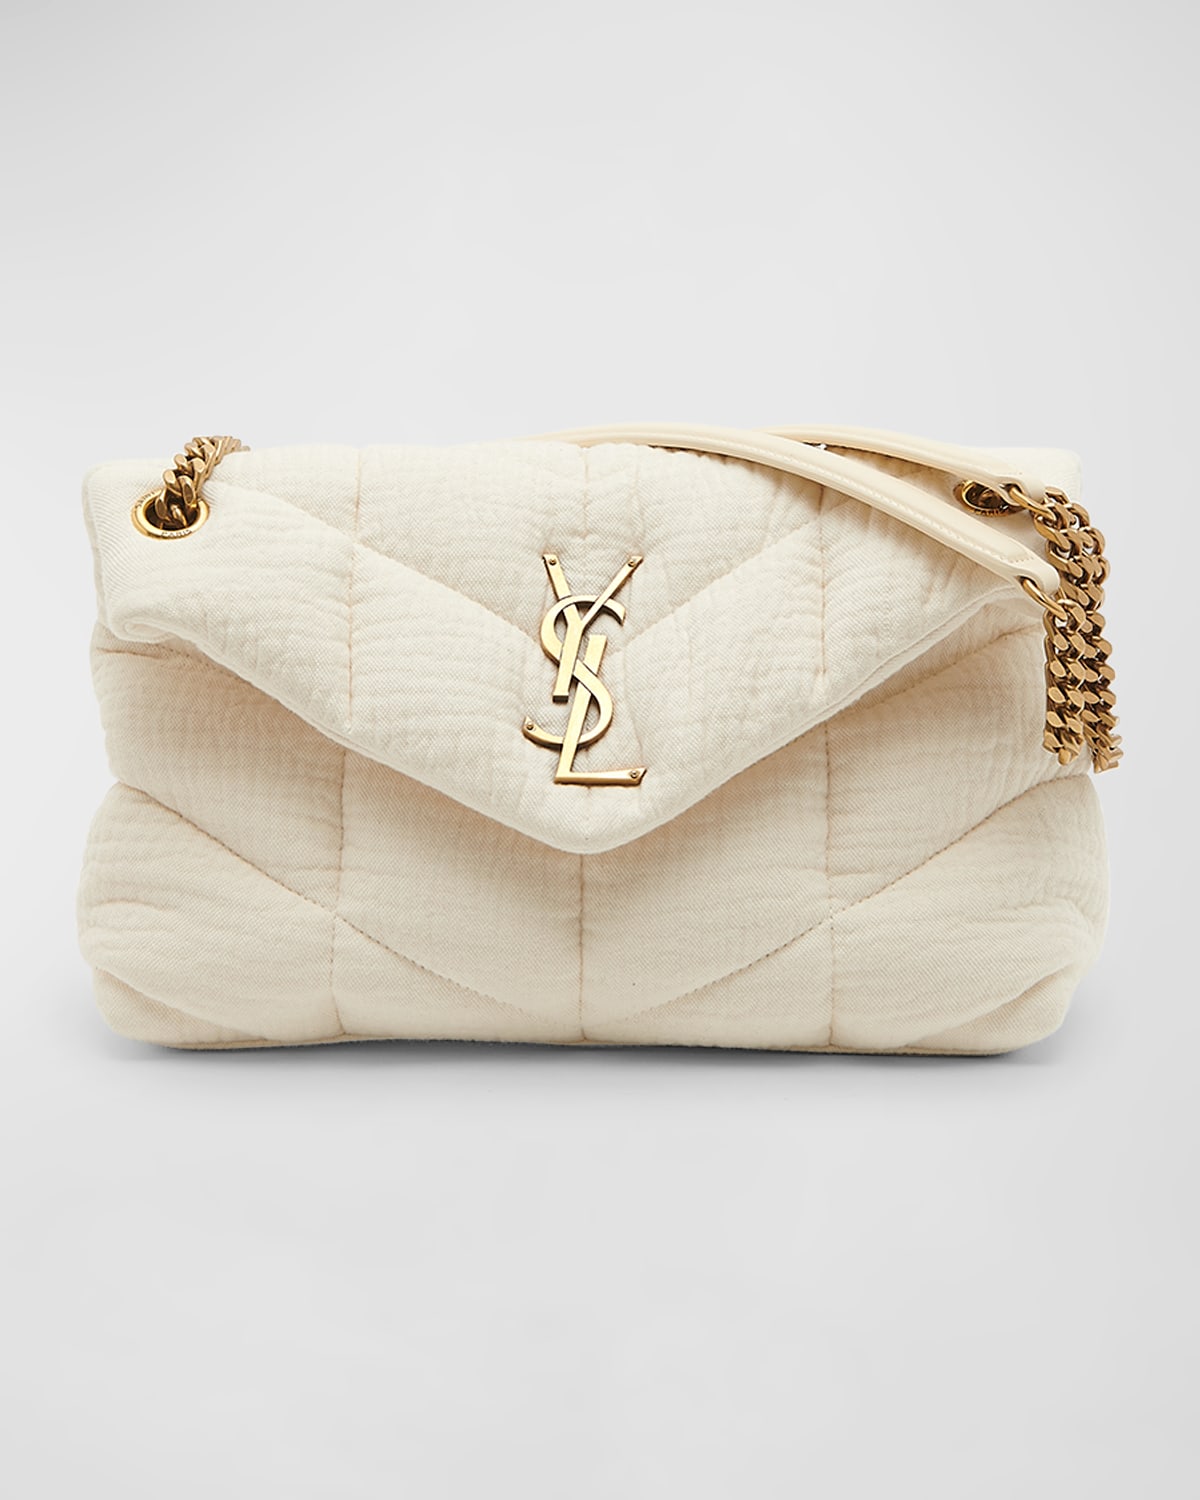 SAINT LAURENT LOULOU SMALL YSL SHOULDER BAG IN QUILTED FABRIC